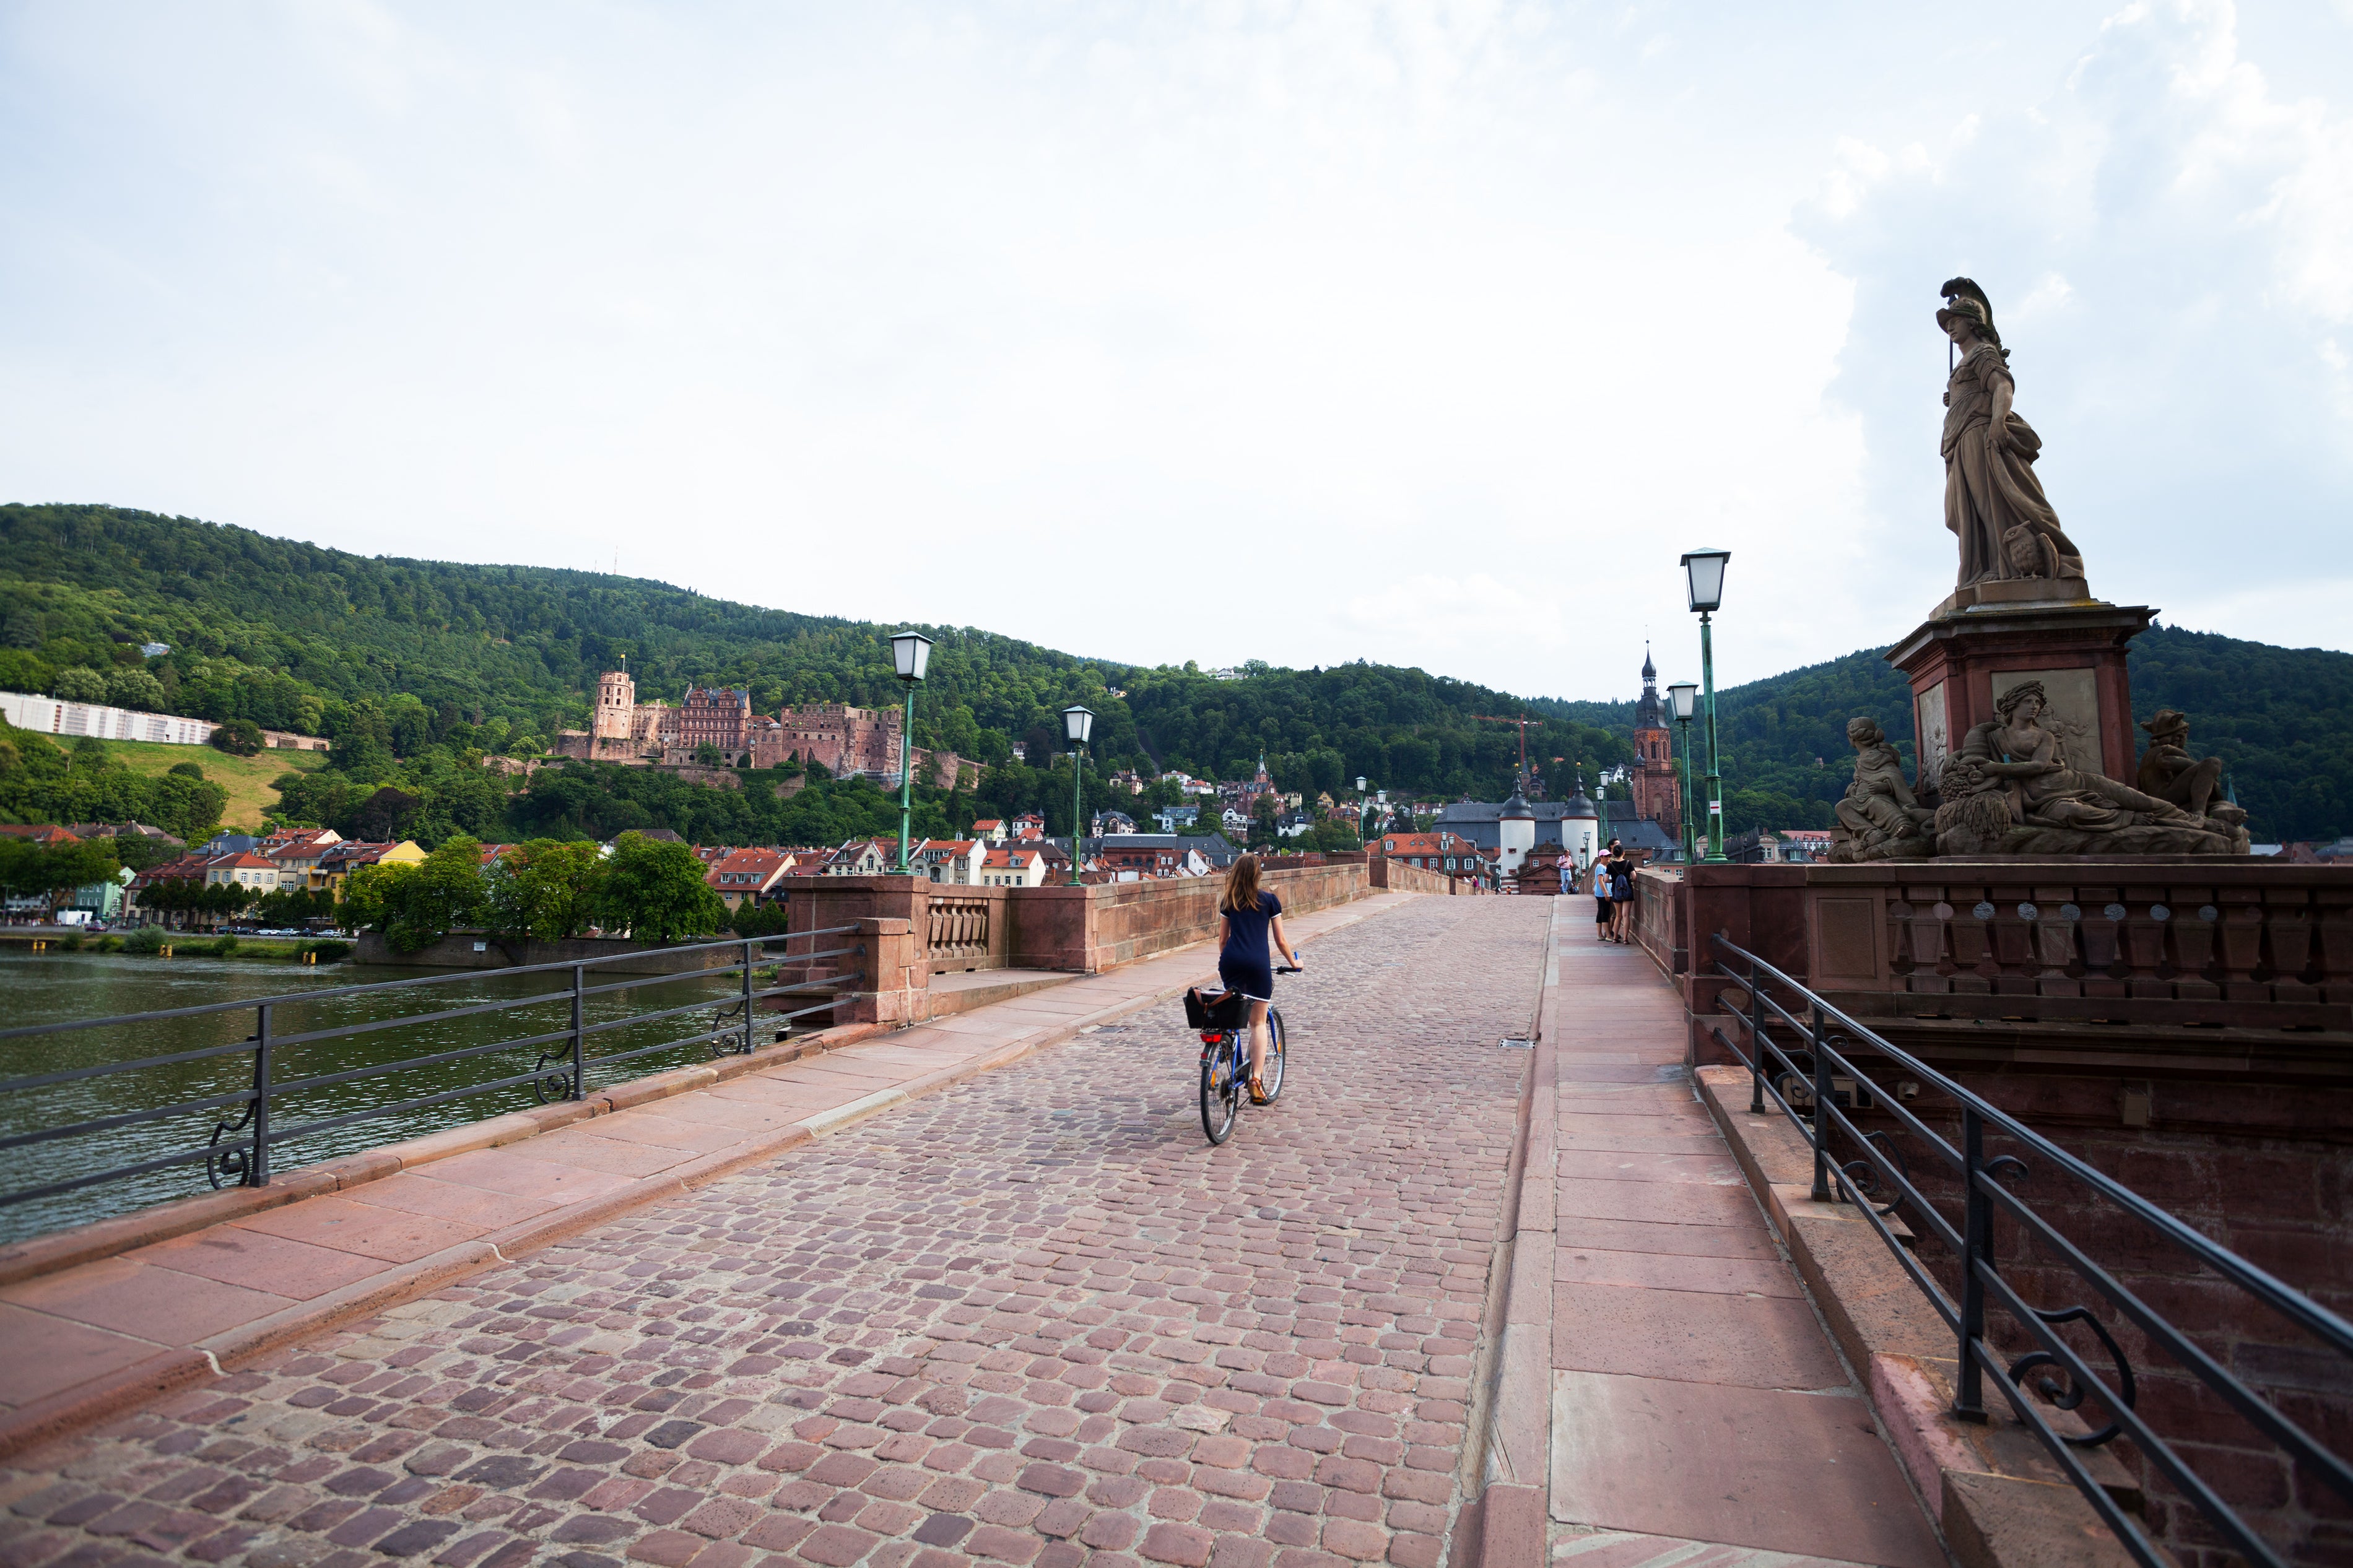 The old bridge over the Neckar in Heidelberg, looking from the north bank towards the old town gate